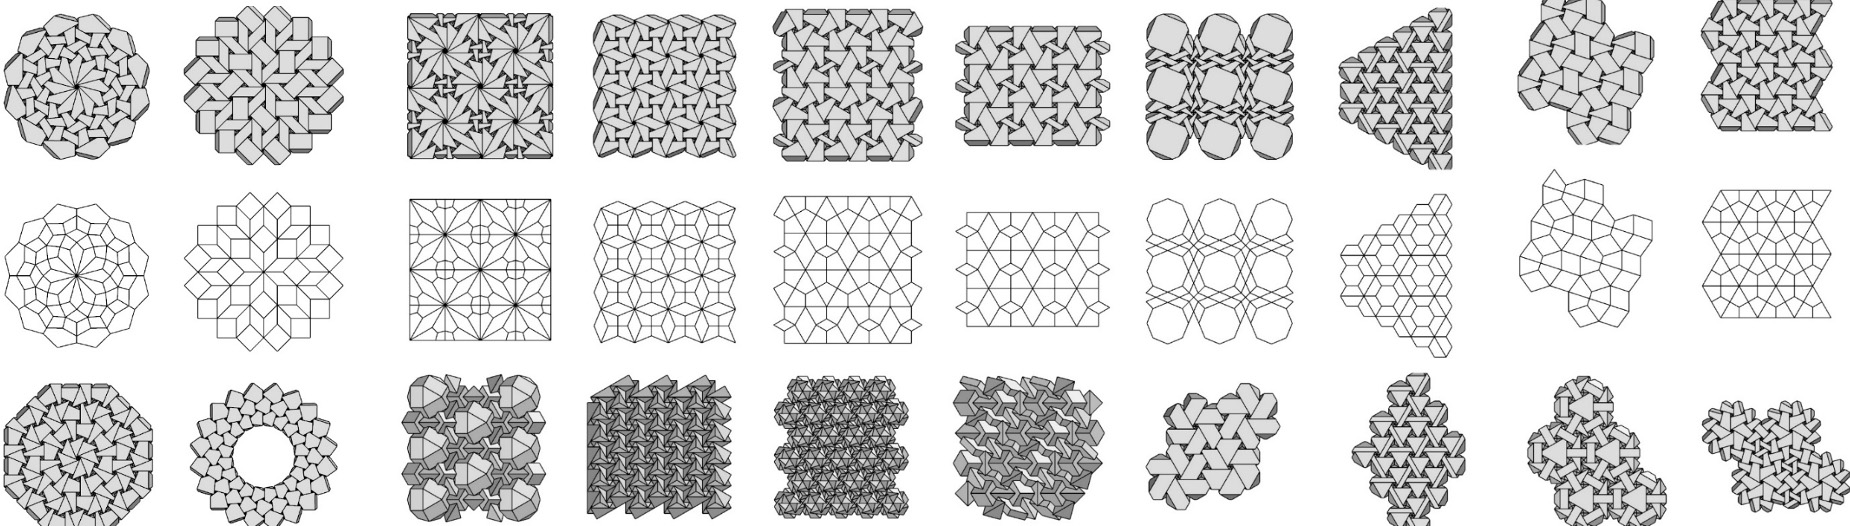 topological interlocking forms